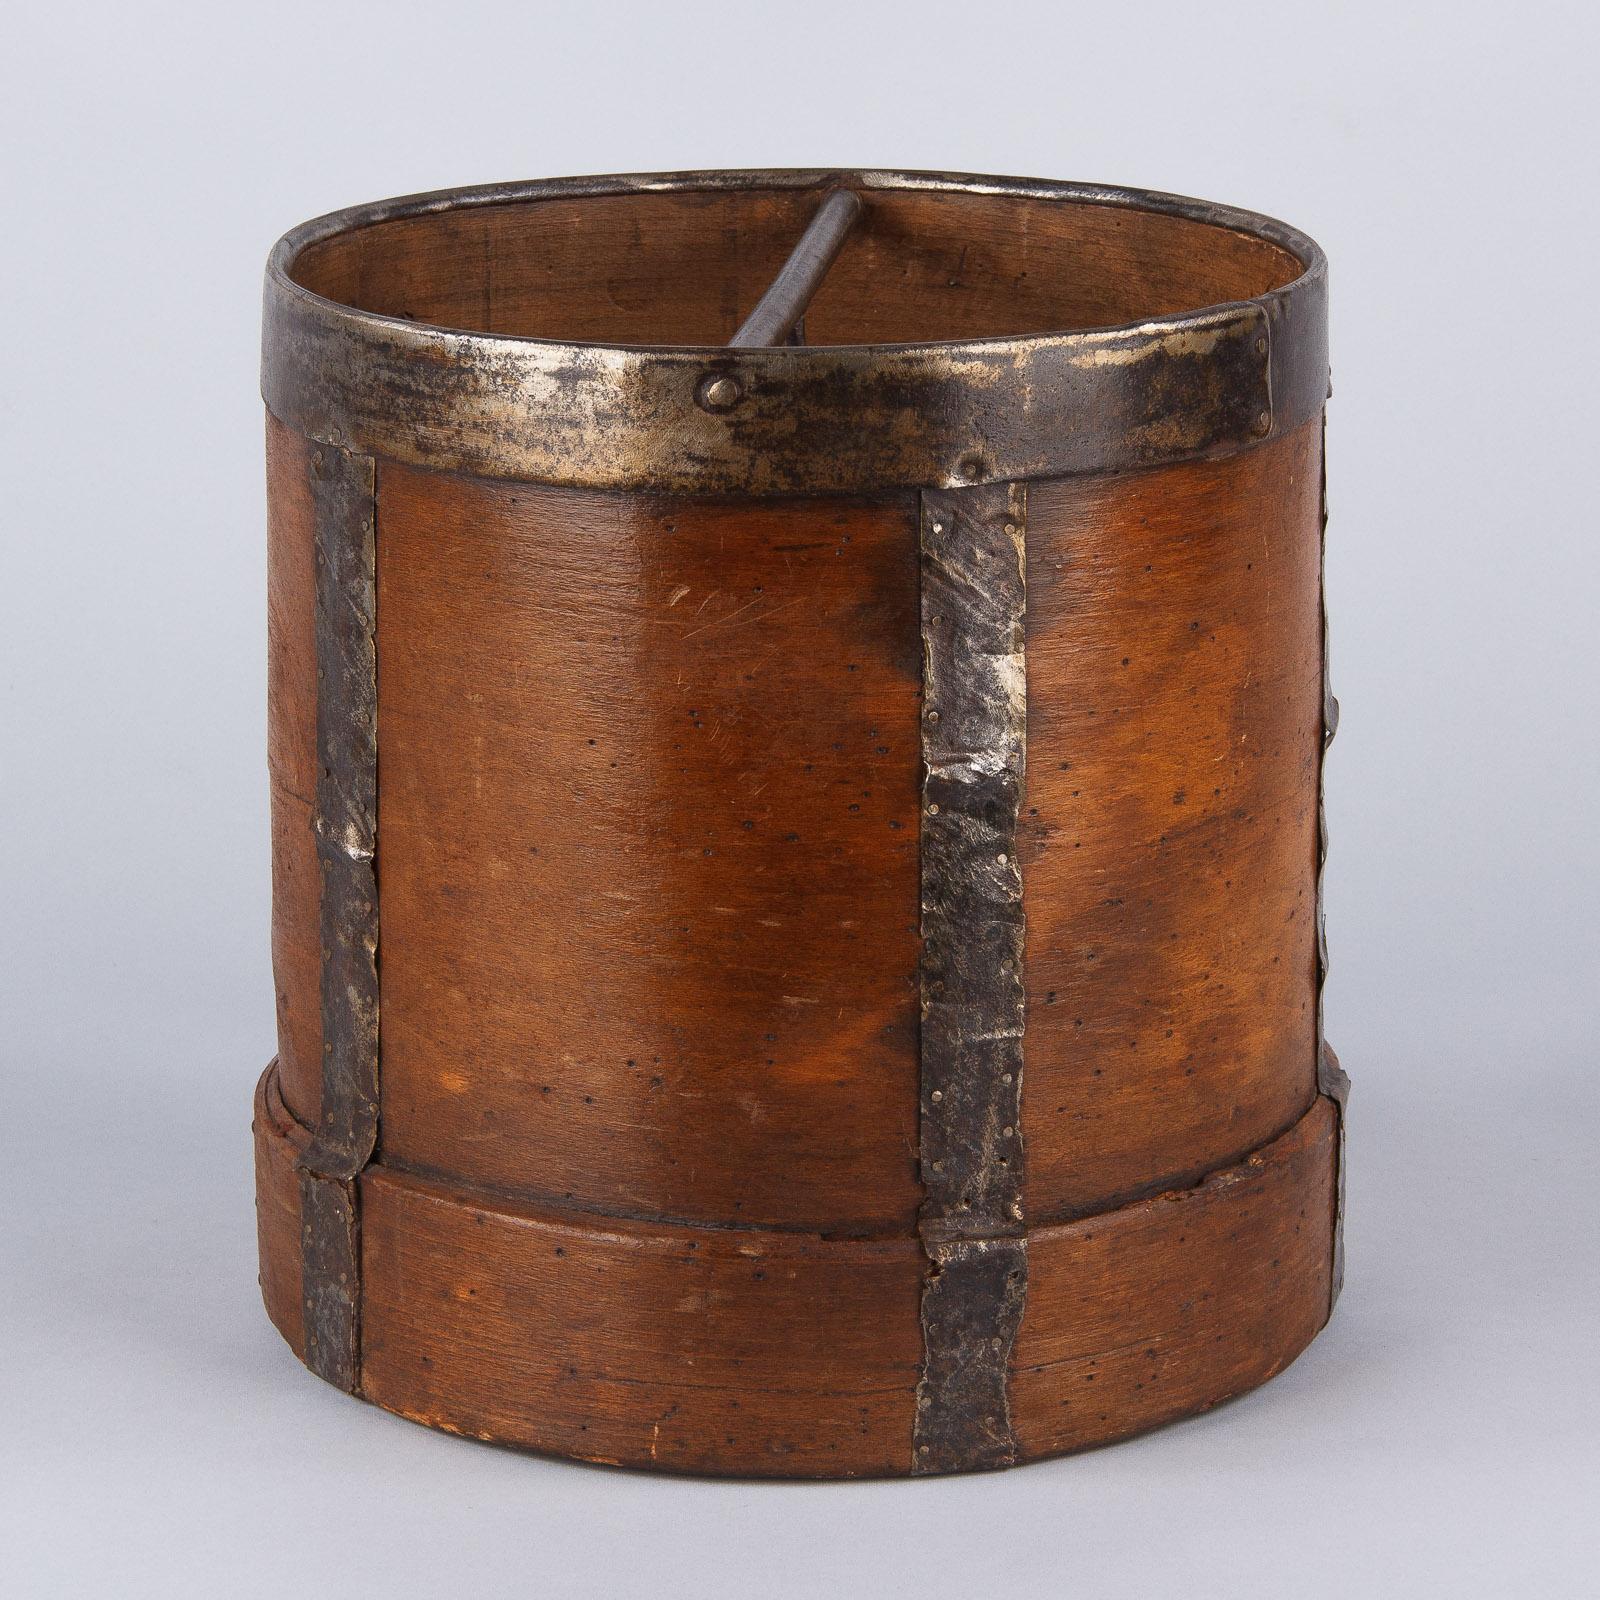 20th Century French Wooden Grain Measure, Early 1900s